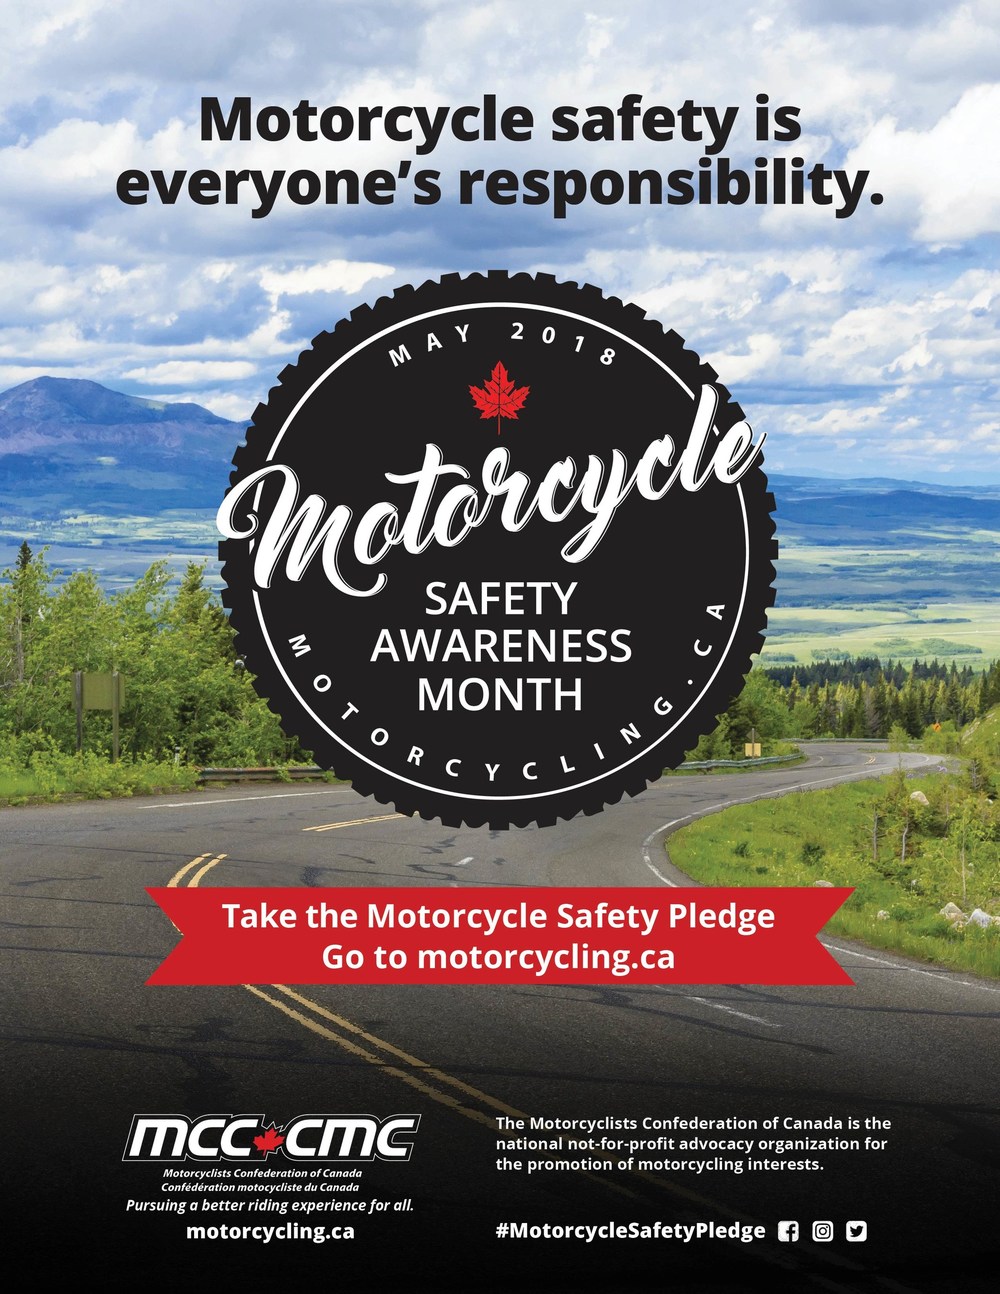 2018 Motorcycle Safety Awareness Month Poster (CNW Group/Motorcyclists Confederation of Canada (MCC))